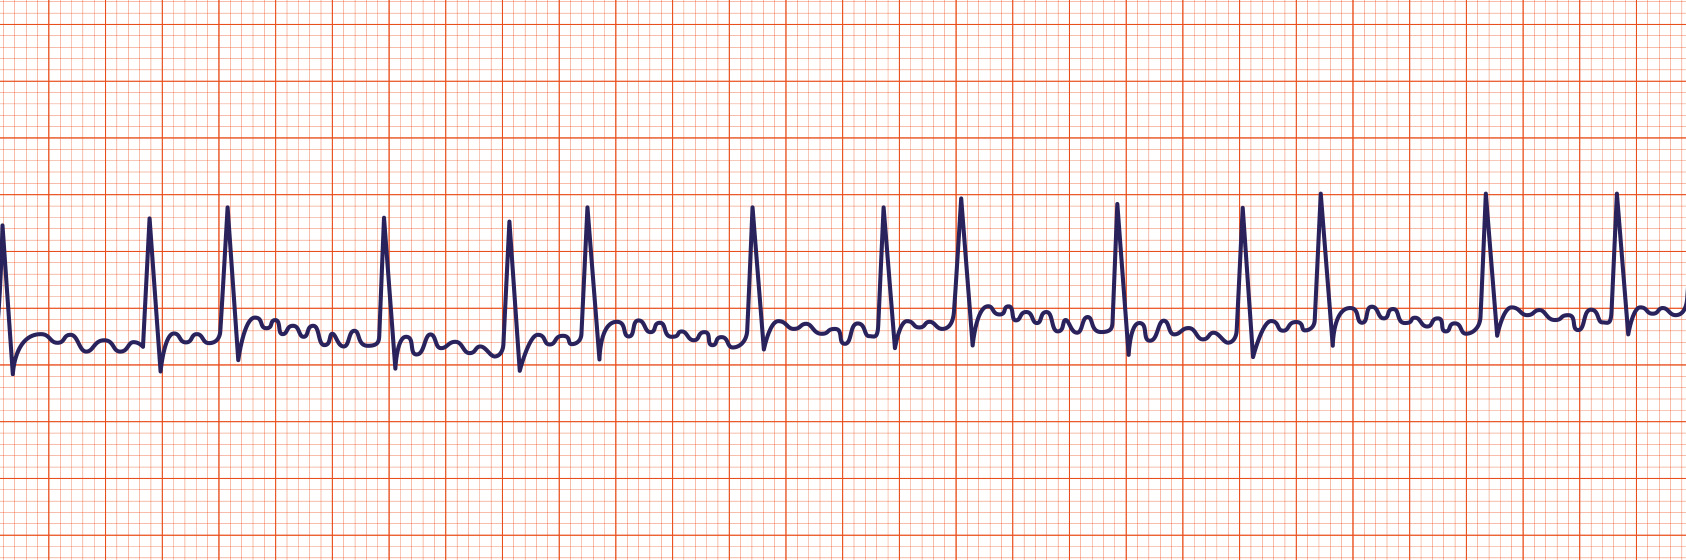 icd 10 atrial flutter